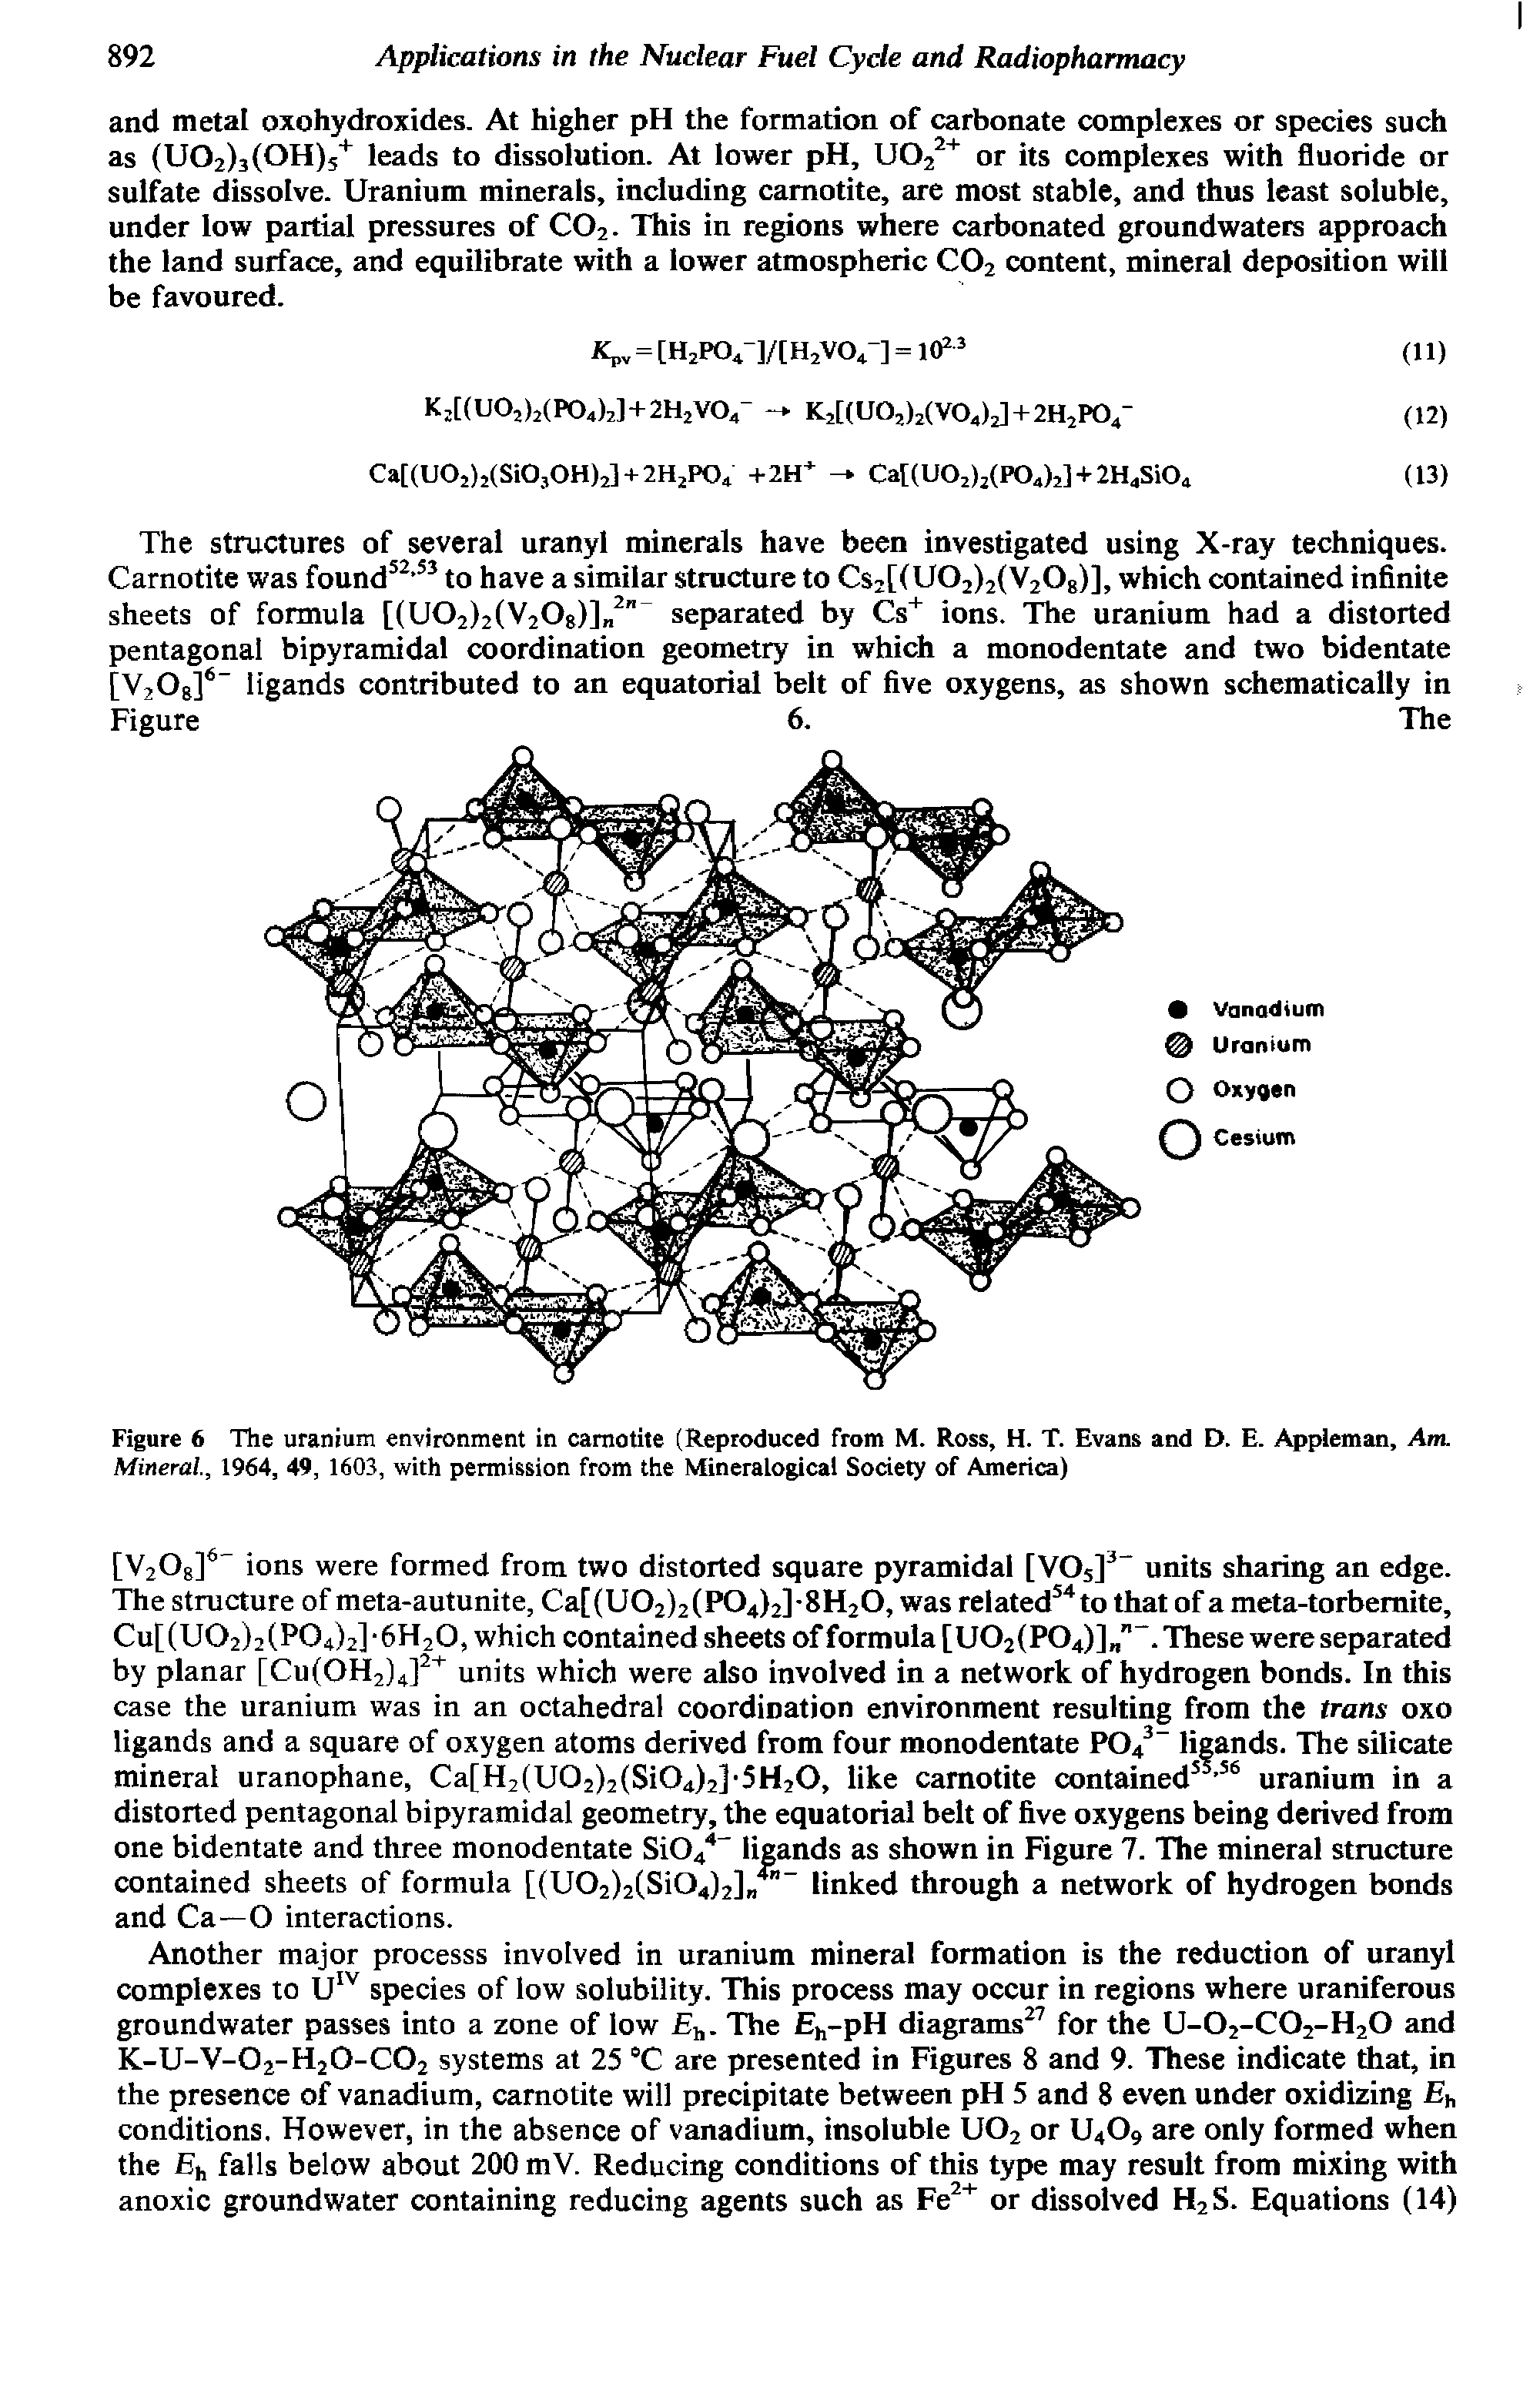 Figure 6 The uranium environment in camotite (Reproduced from M. Ross, H. T. Evans and D. E. Appleman, Am. Mineral., 1964, 49, 1603, with permission from the Mineralogical Society of America)...